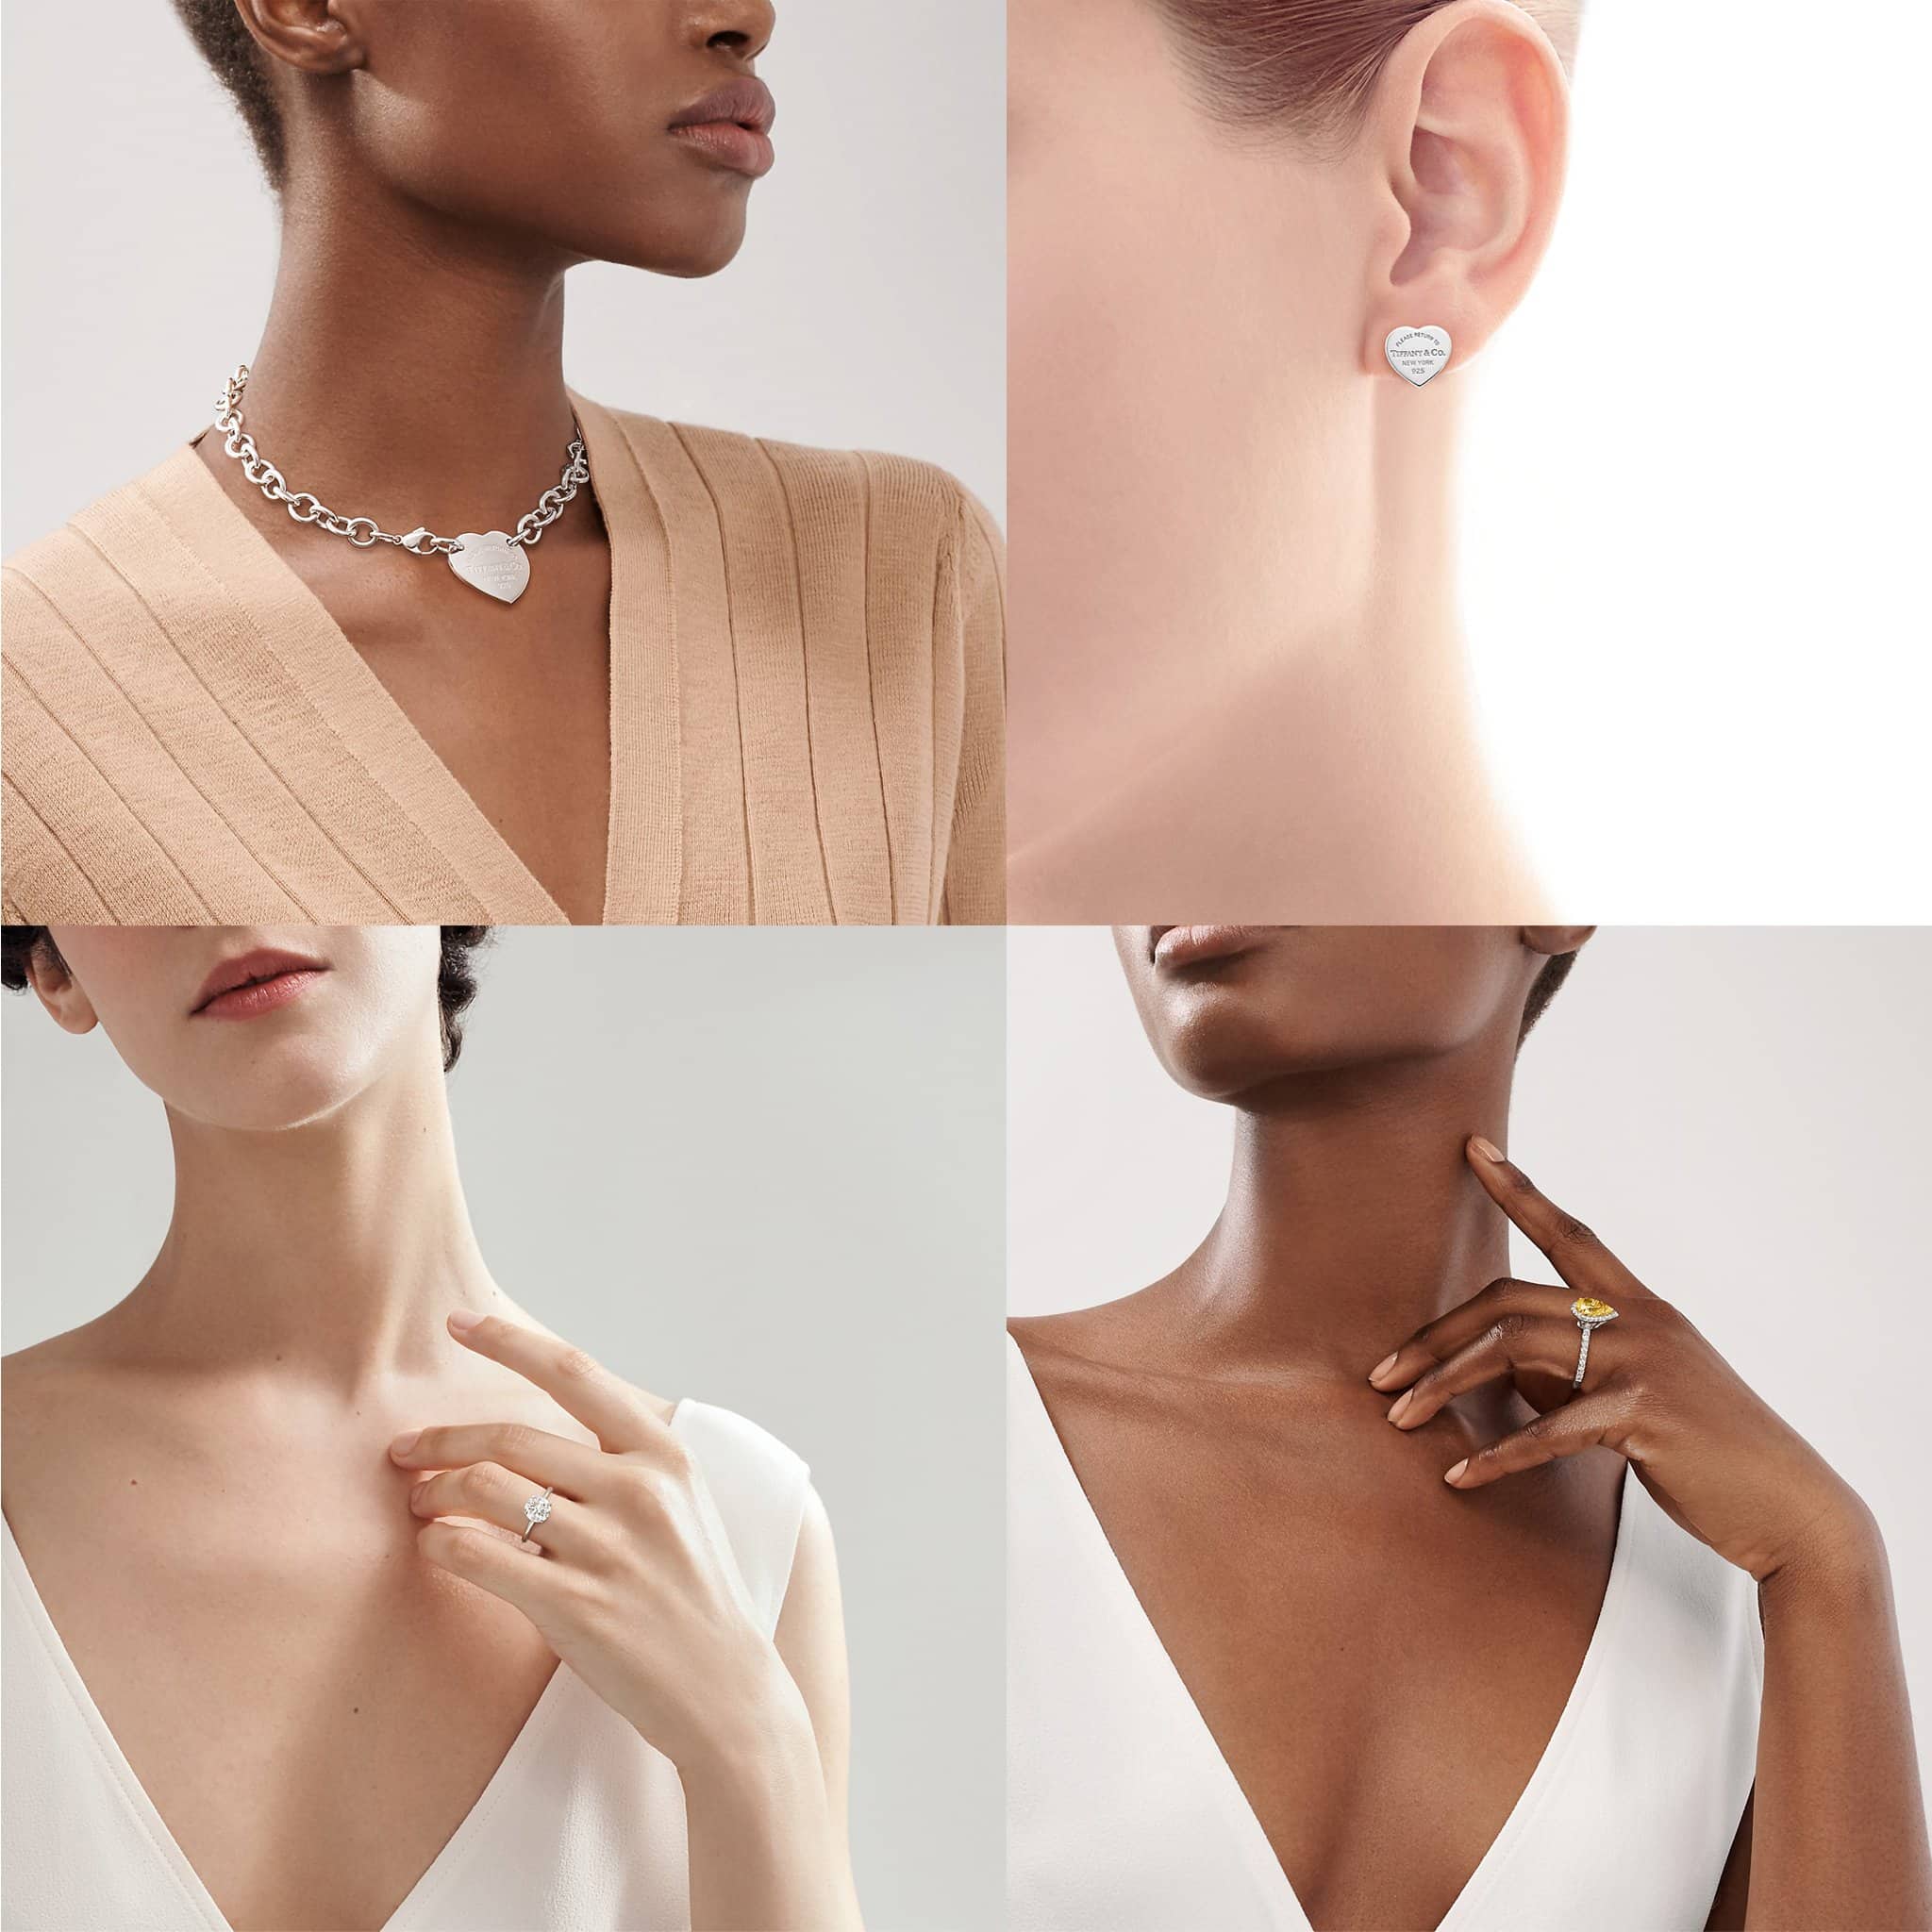 Return to Tiffany Heart Tag necklace, $675; Return to Tiffany Heart Tag Stud earrings, $200; Tiffany True engagement ring; Tiffany Soleste Pear-shaped Halo engagement ring, $32,400